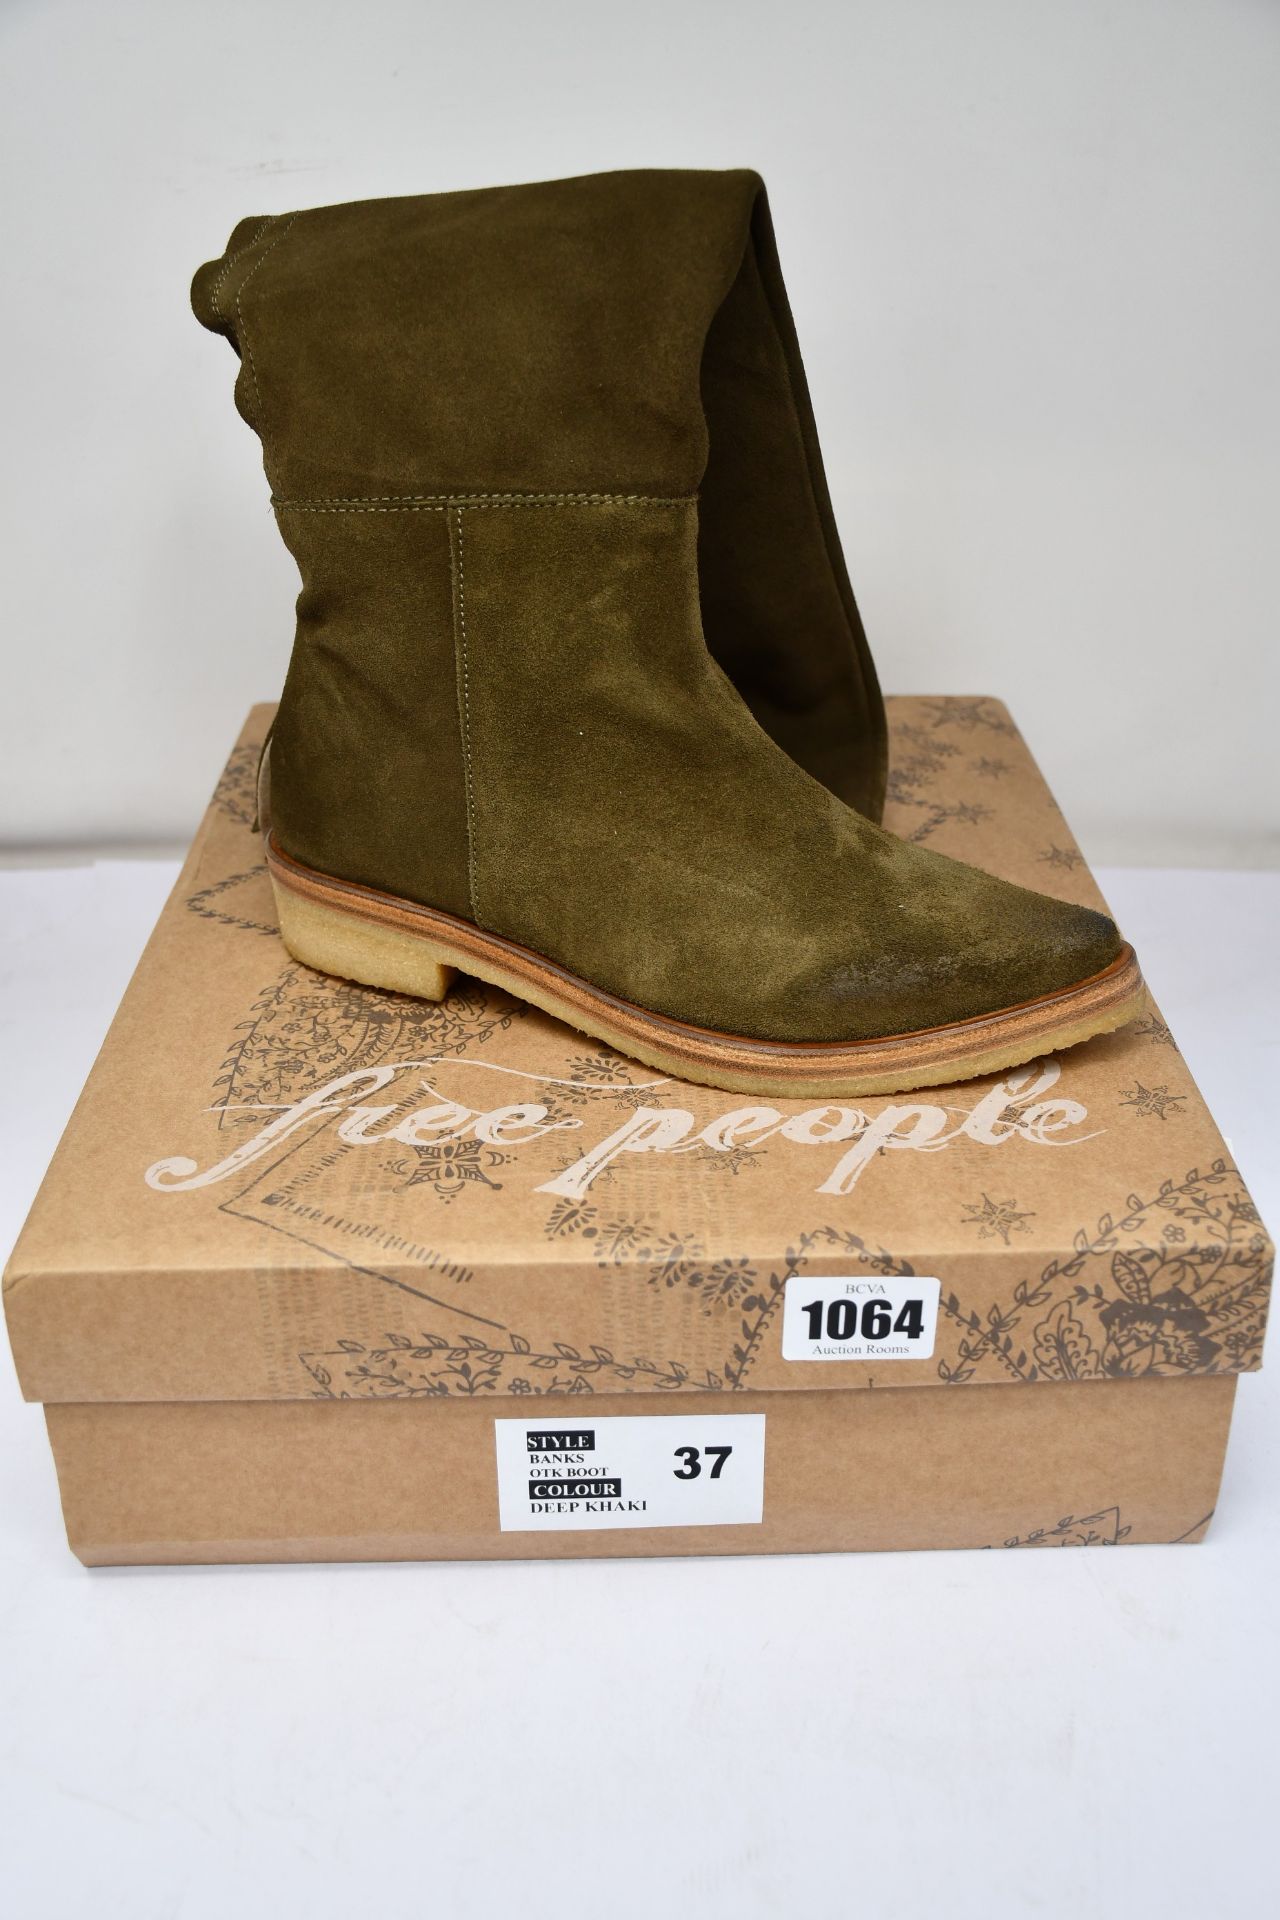 A pair of as new Free People Banks over-the-knee boots in khaki (EU 37 - RRP £328).